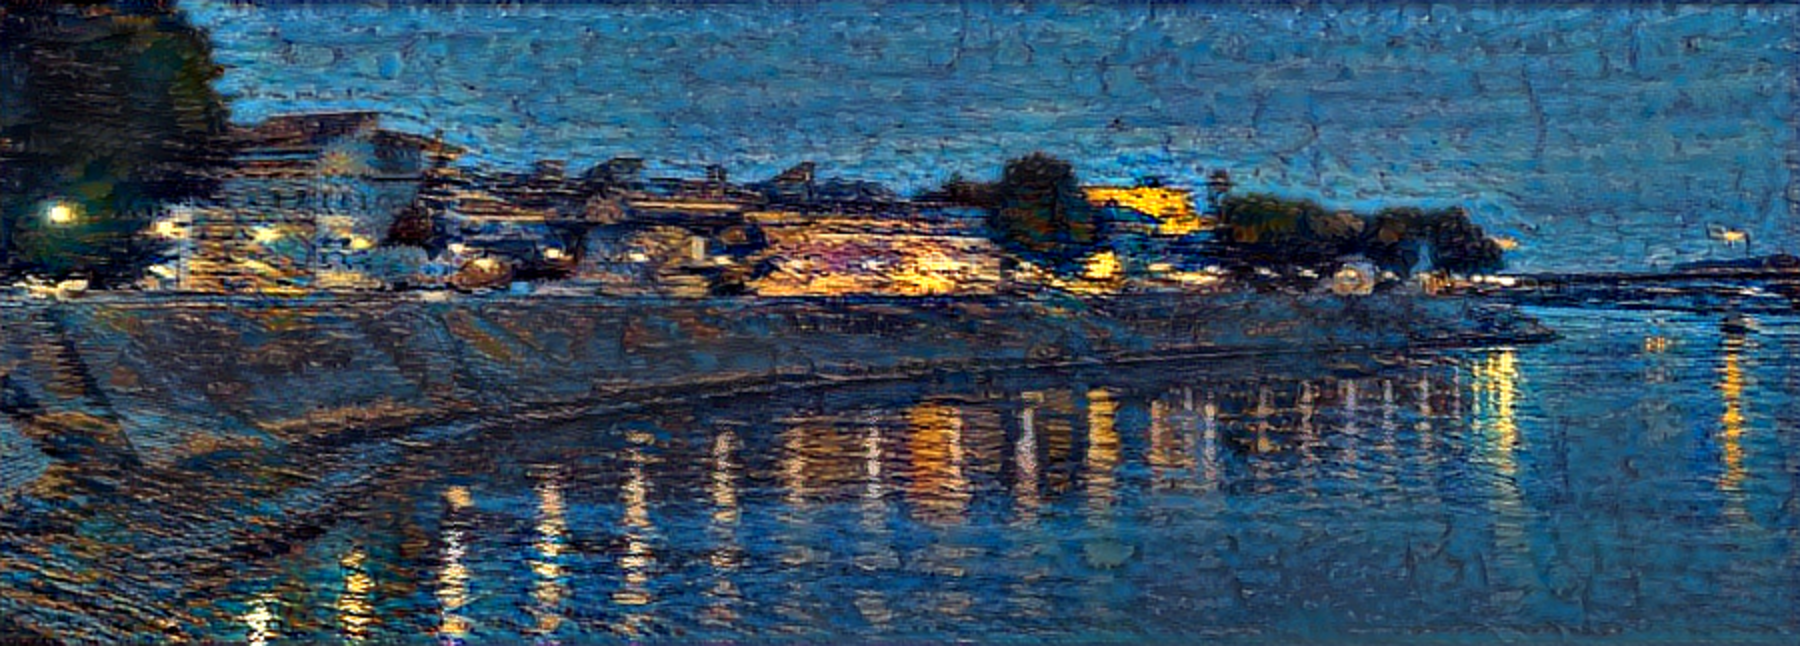 Result: Starry NIght Over Rhone, Neural Style Transfer